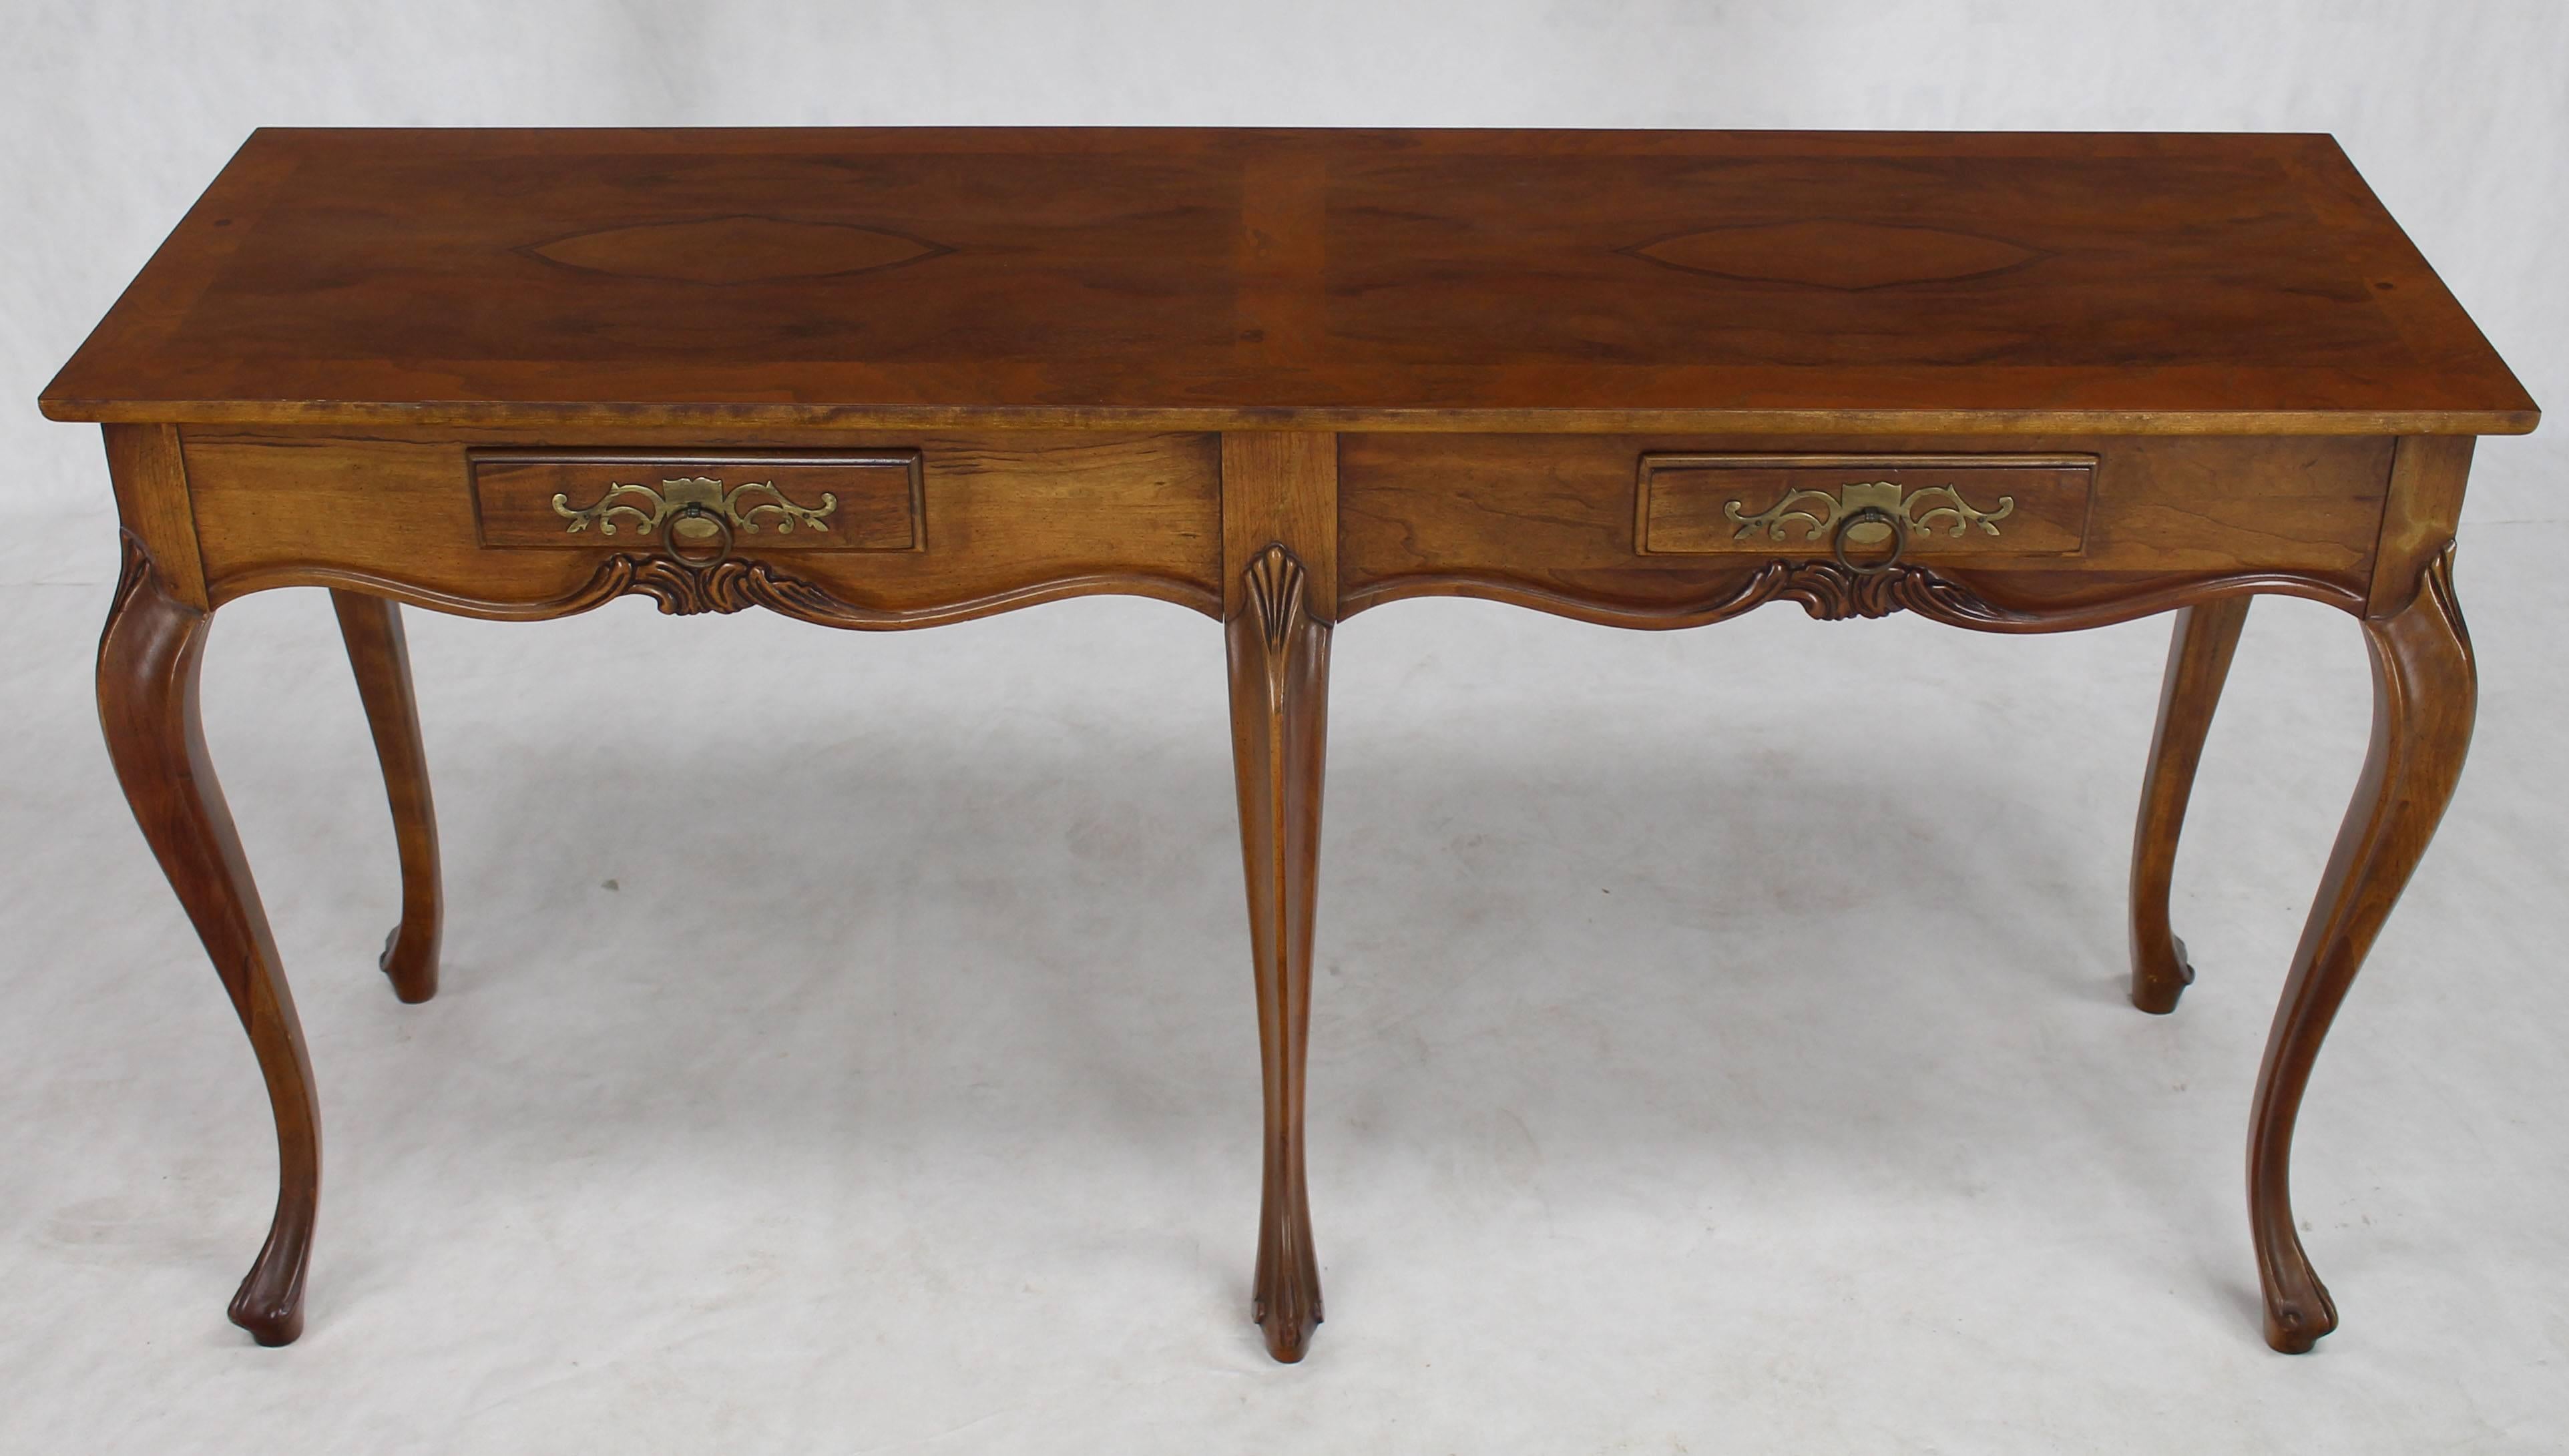 Baker walnut console table with two drawers.